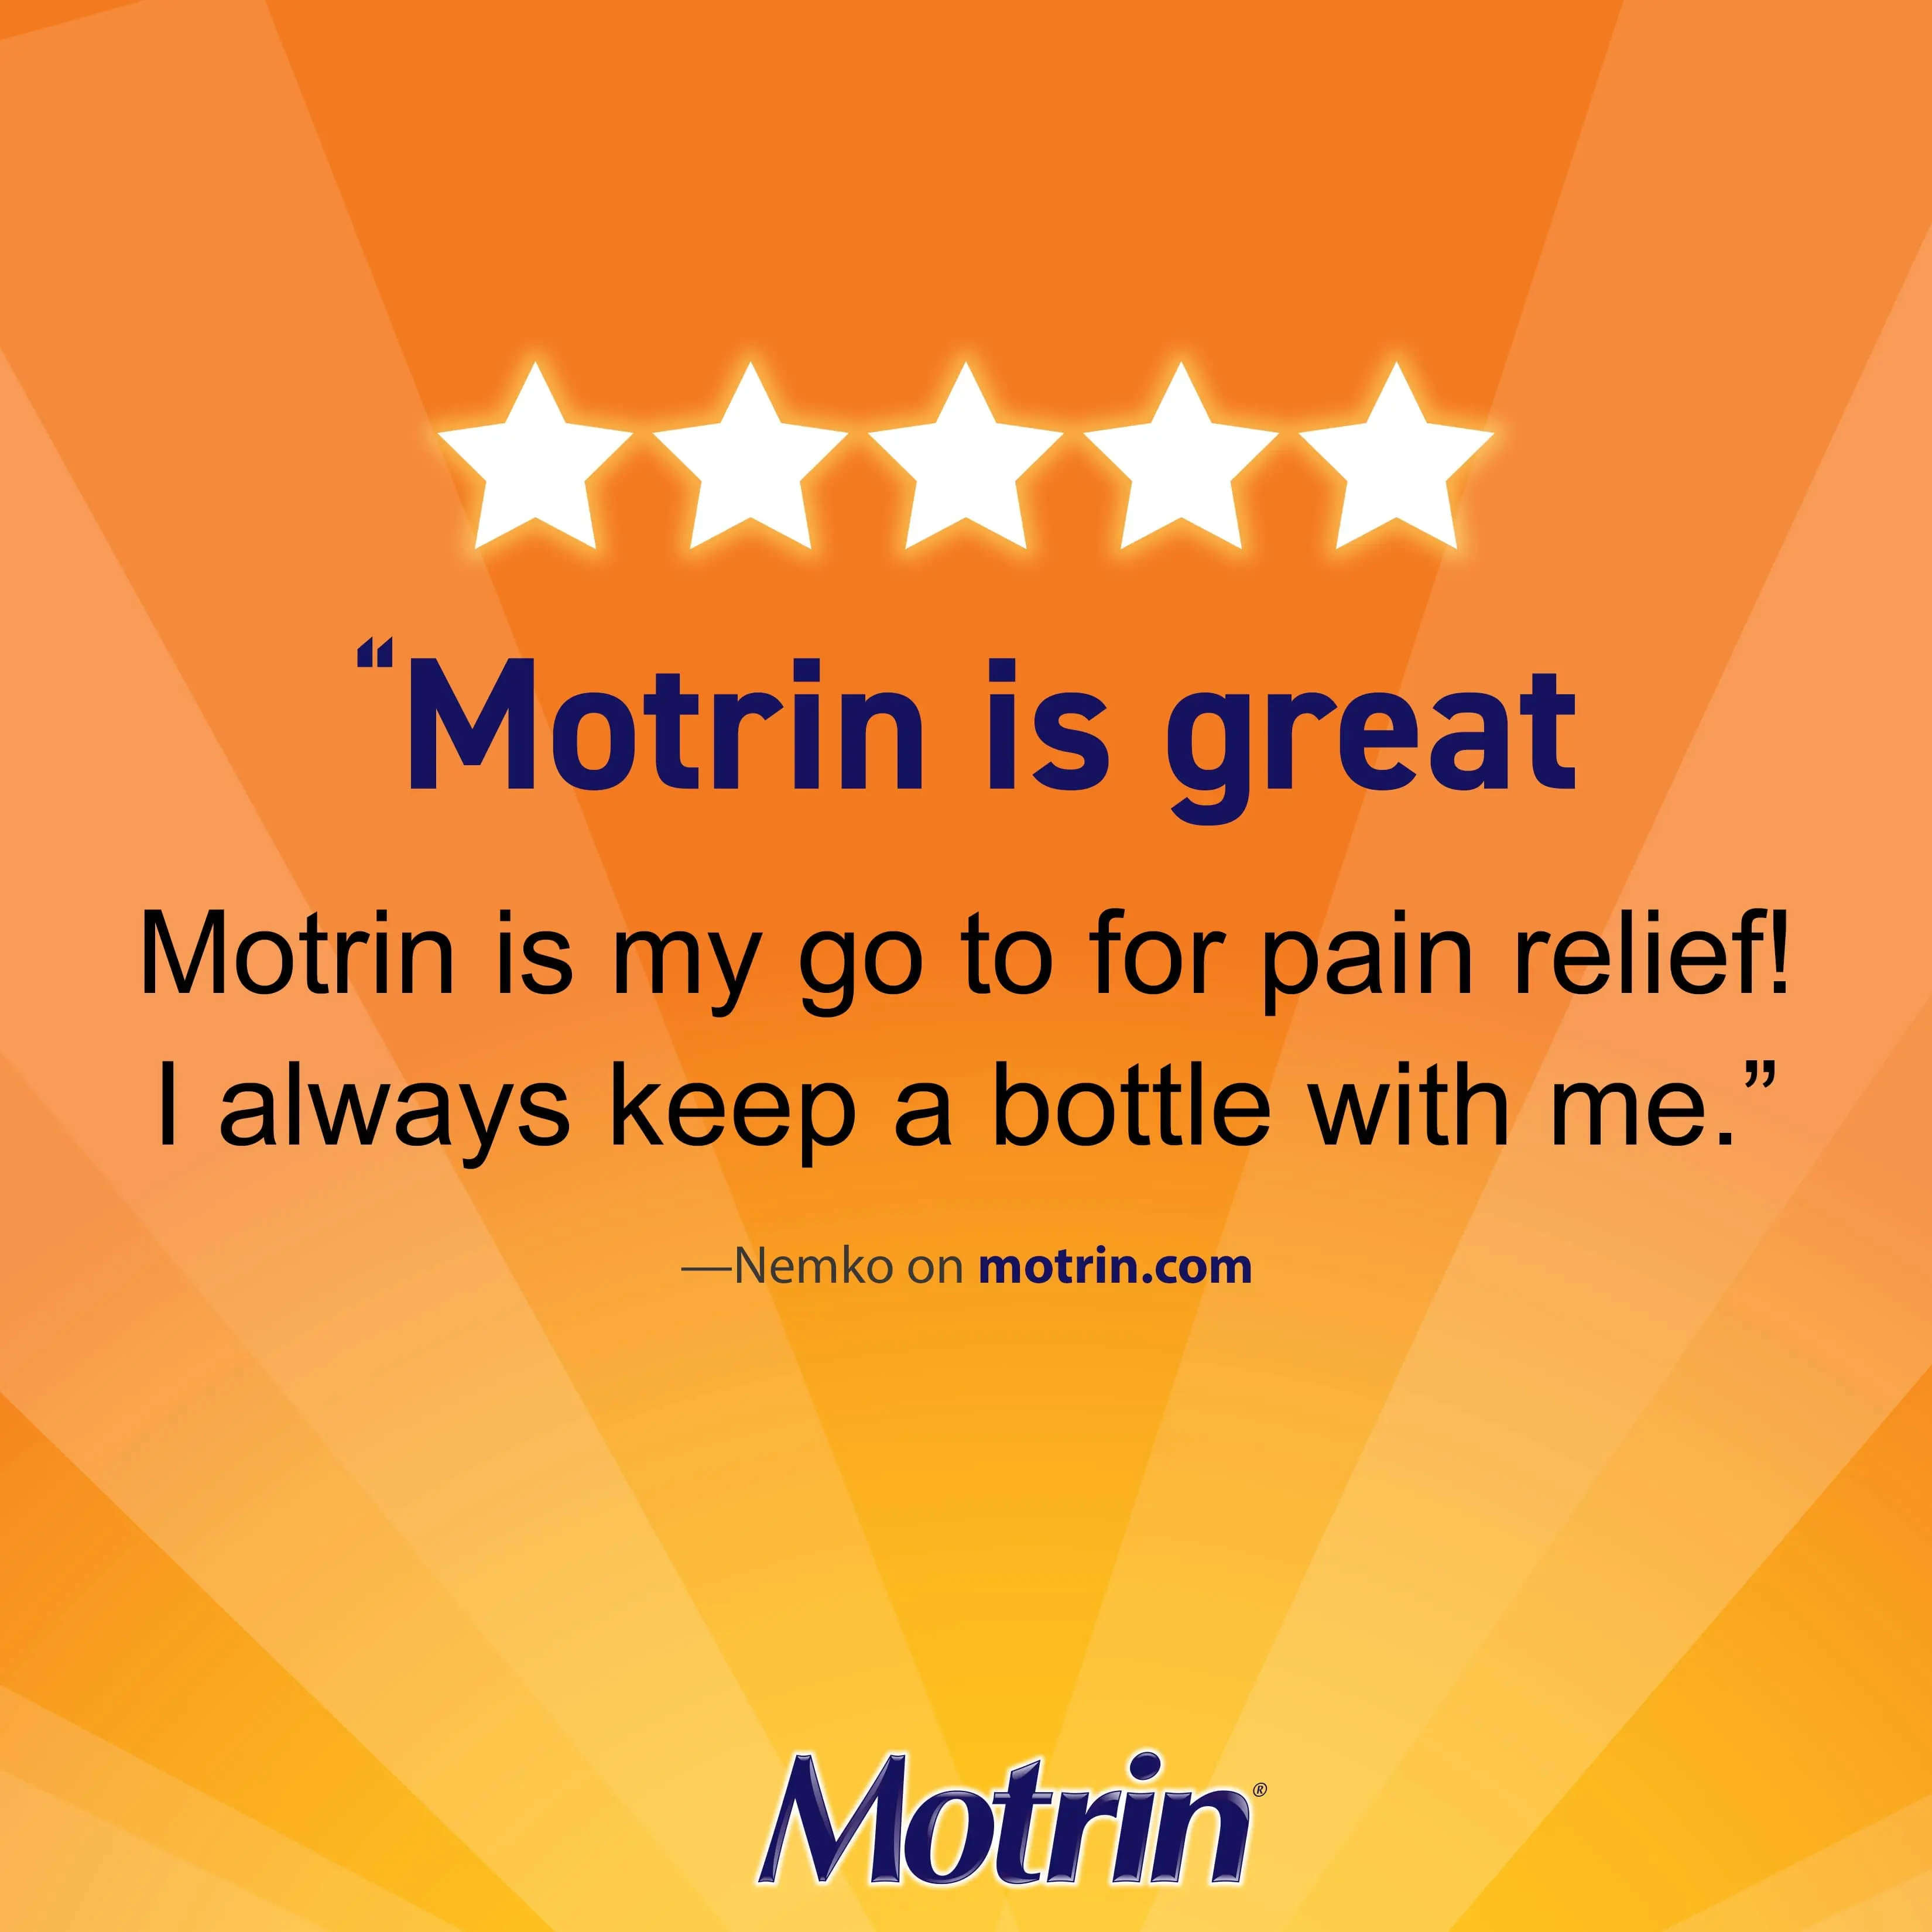 'Motrin is great' review